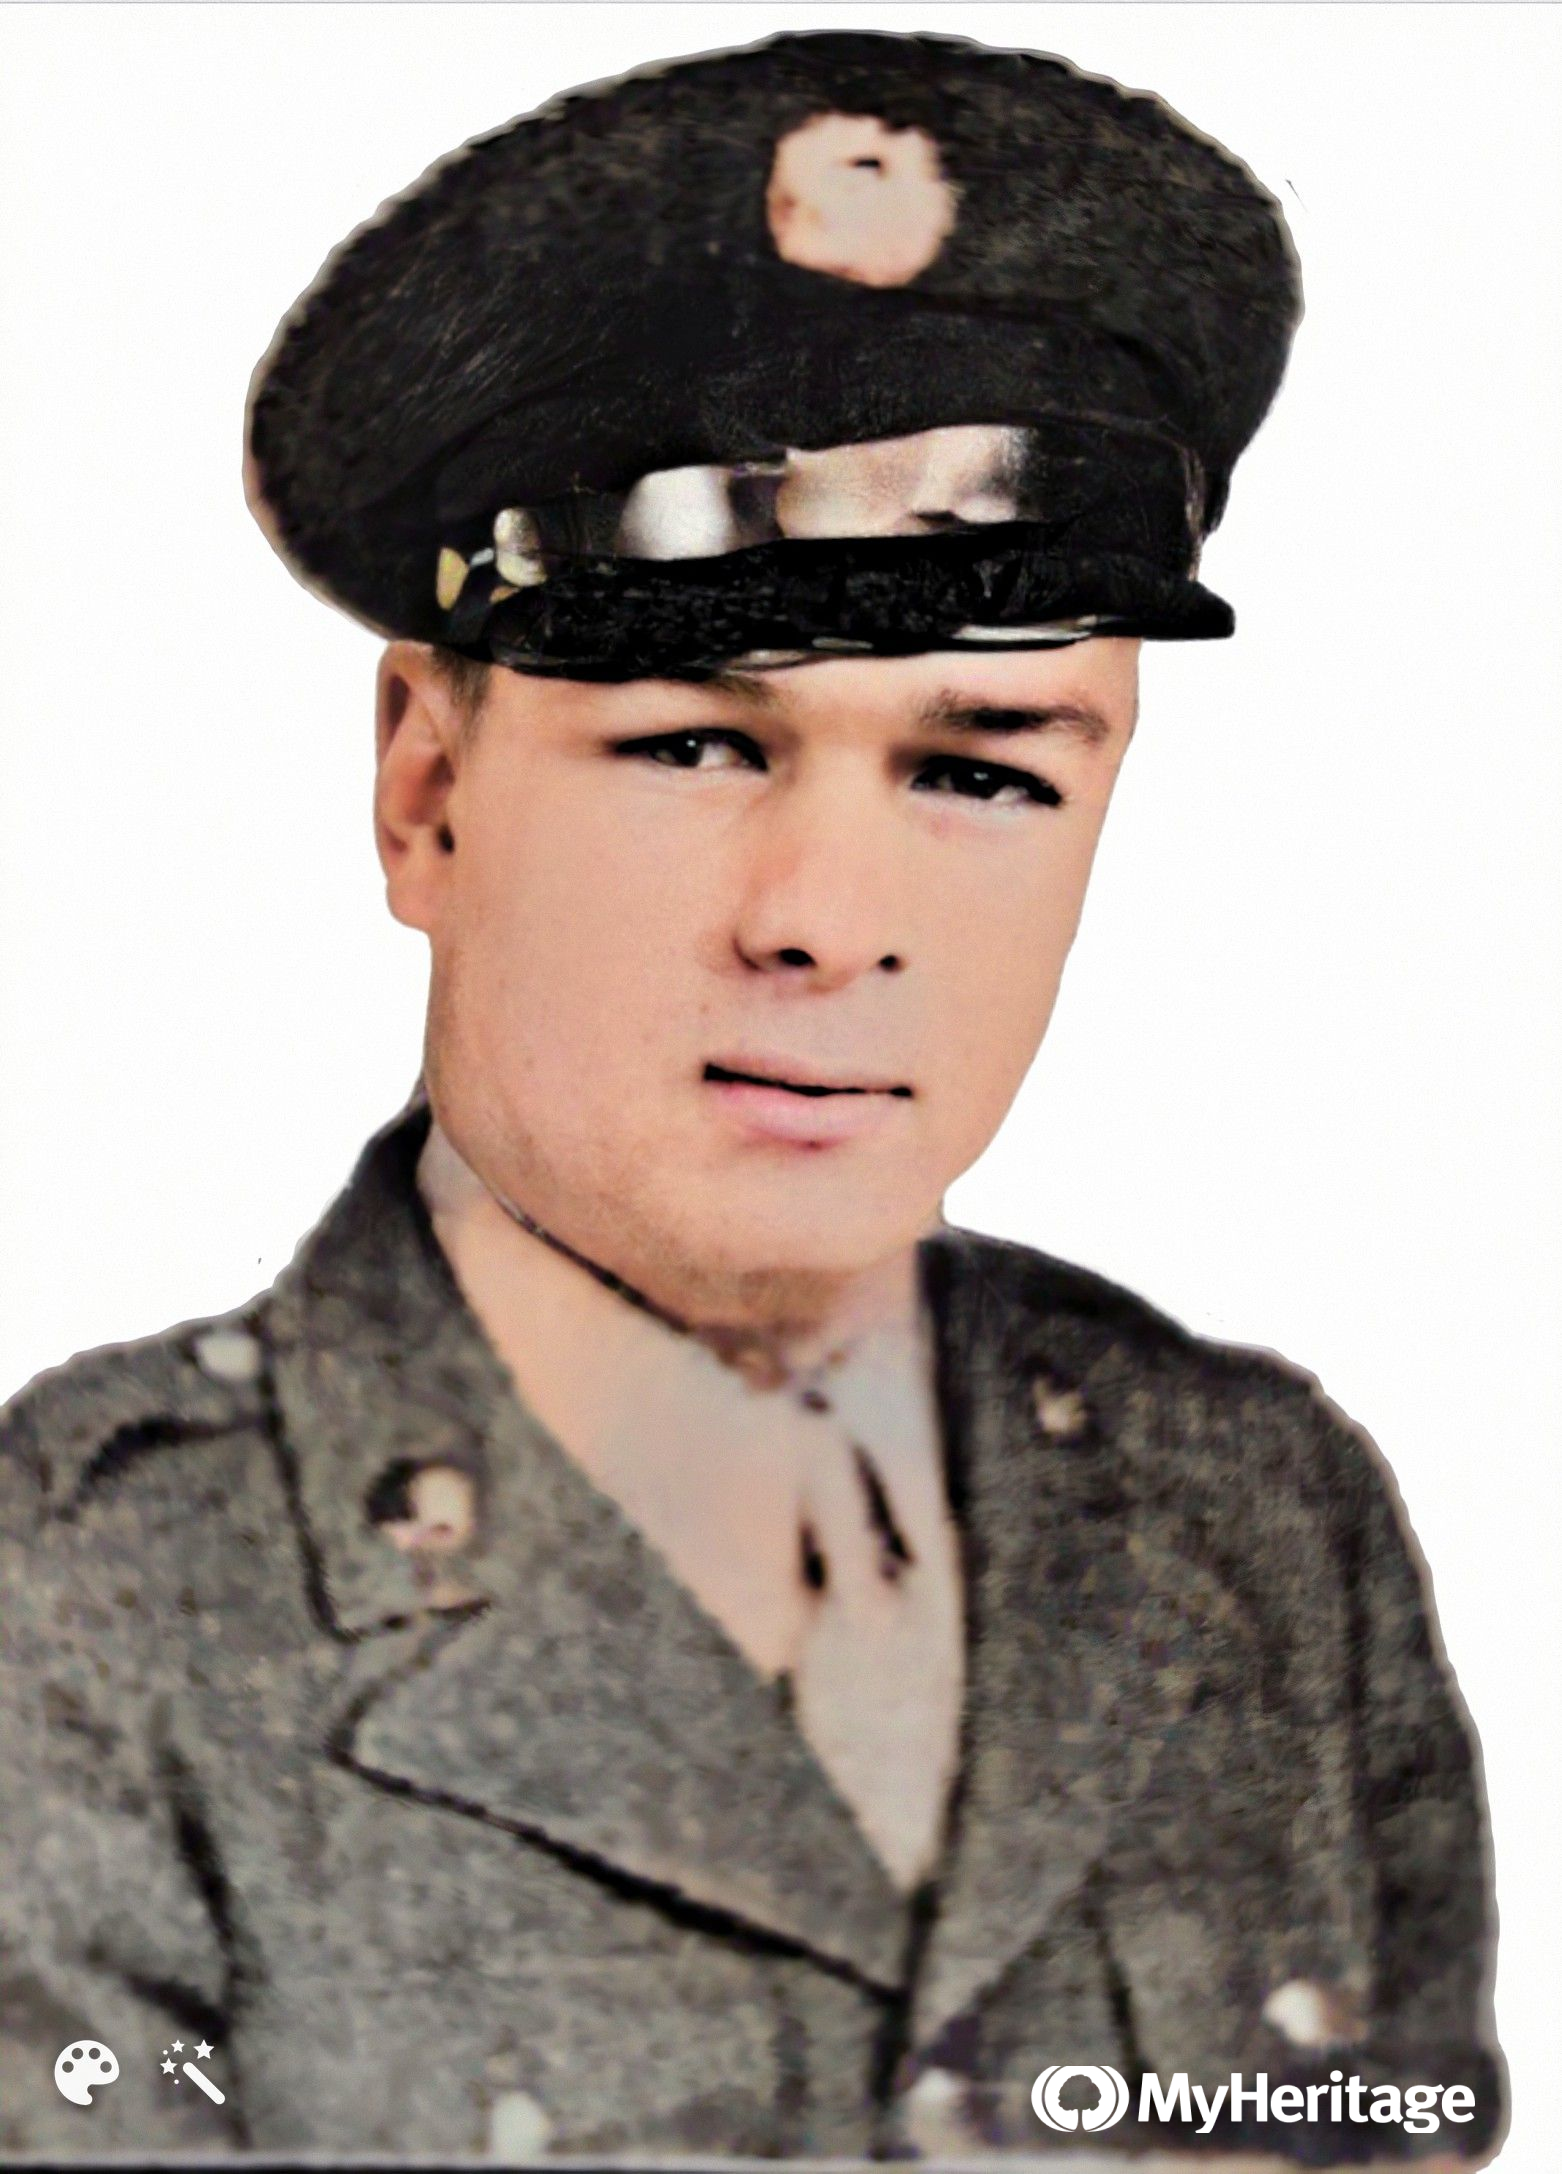 Paul T. Stevens. Killed on June 19, 1944 in the Battle of Normandy, he is buried in the American cemetery of Colleville-Sur-Mer. Photo enhanced and colorized by MyHeritage